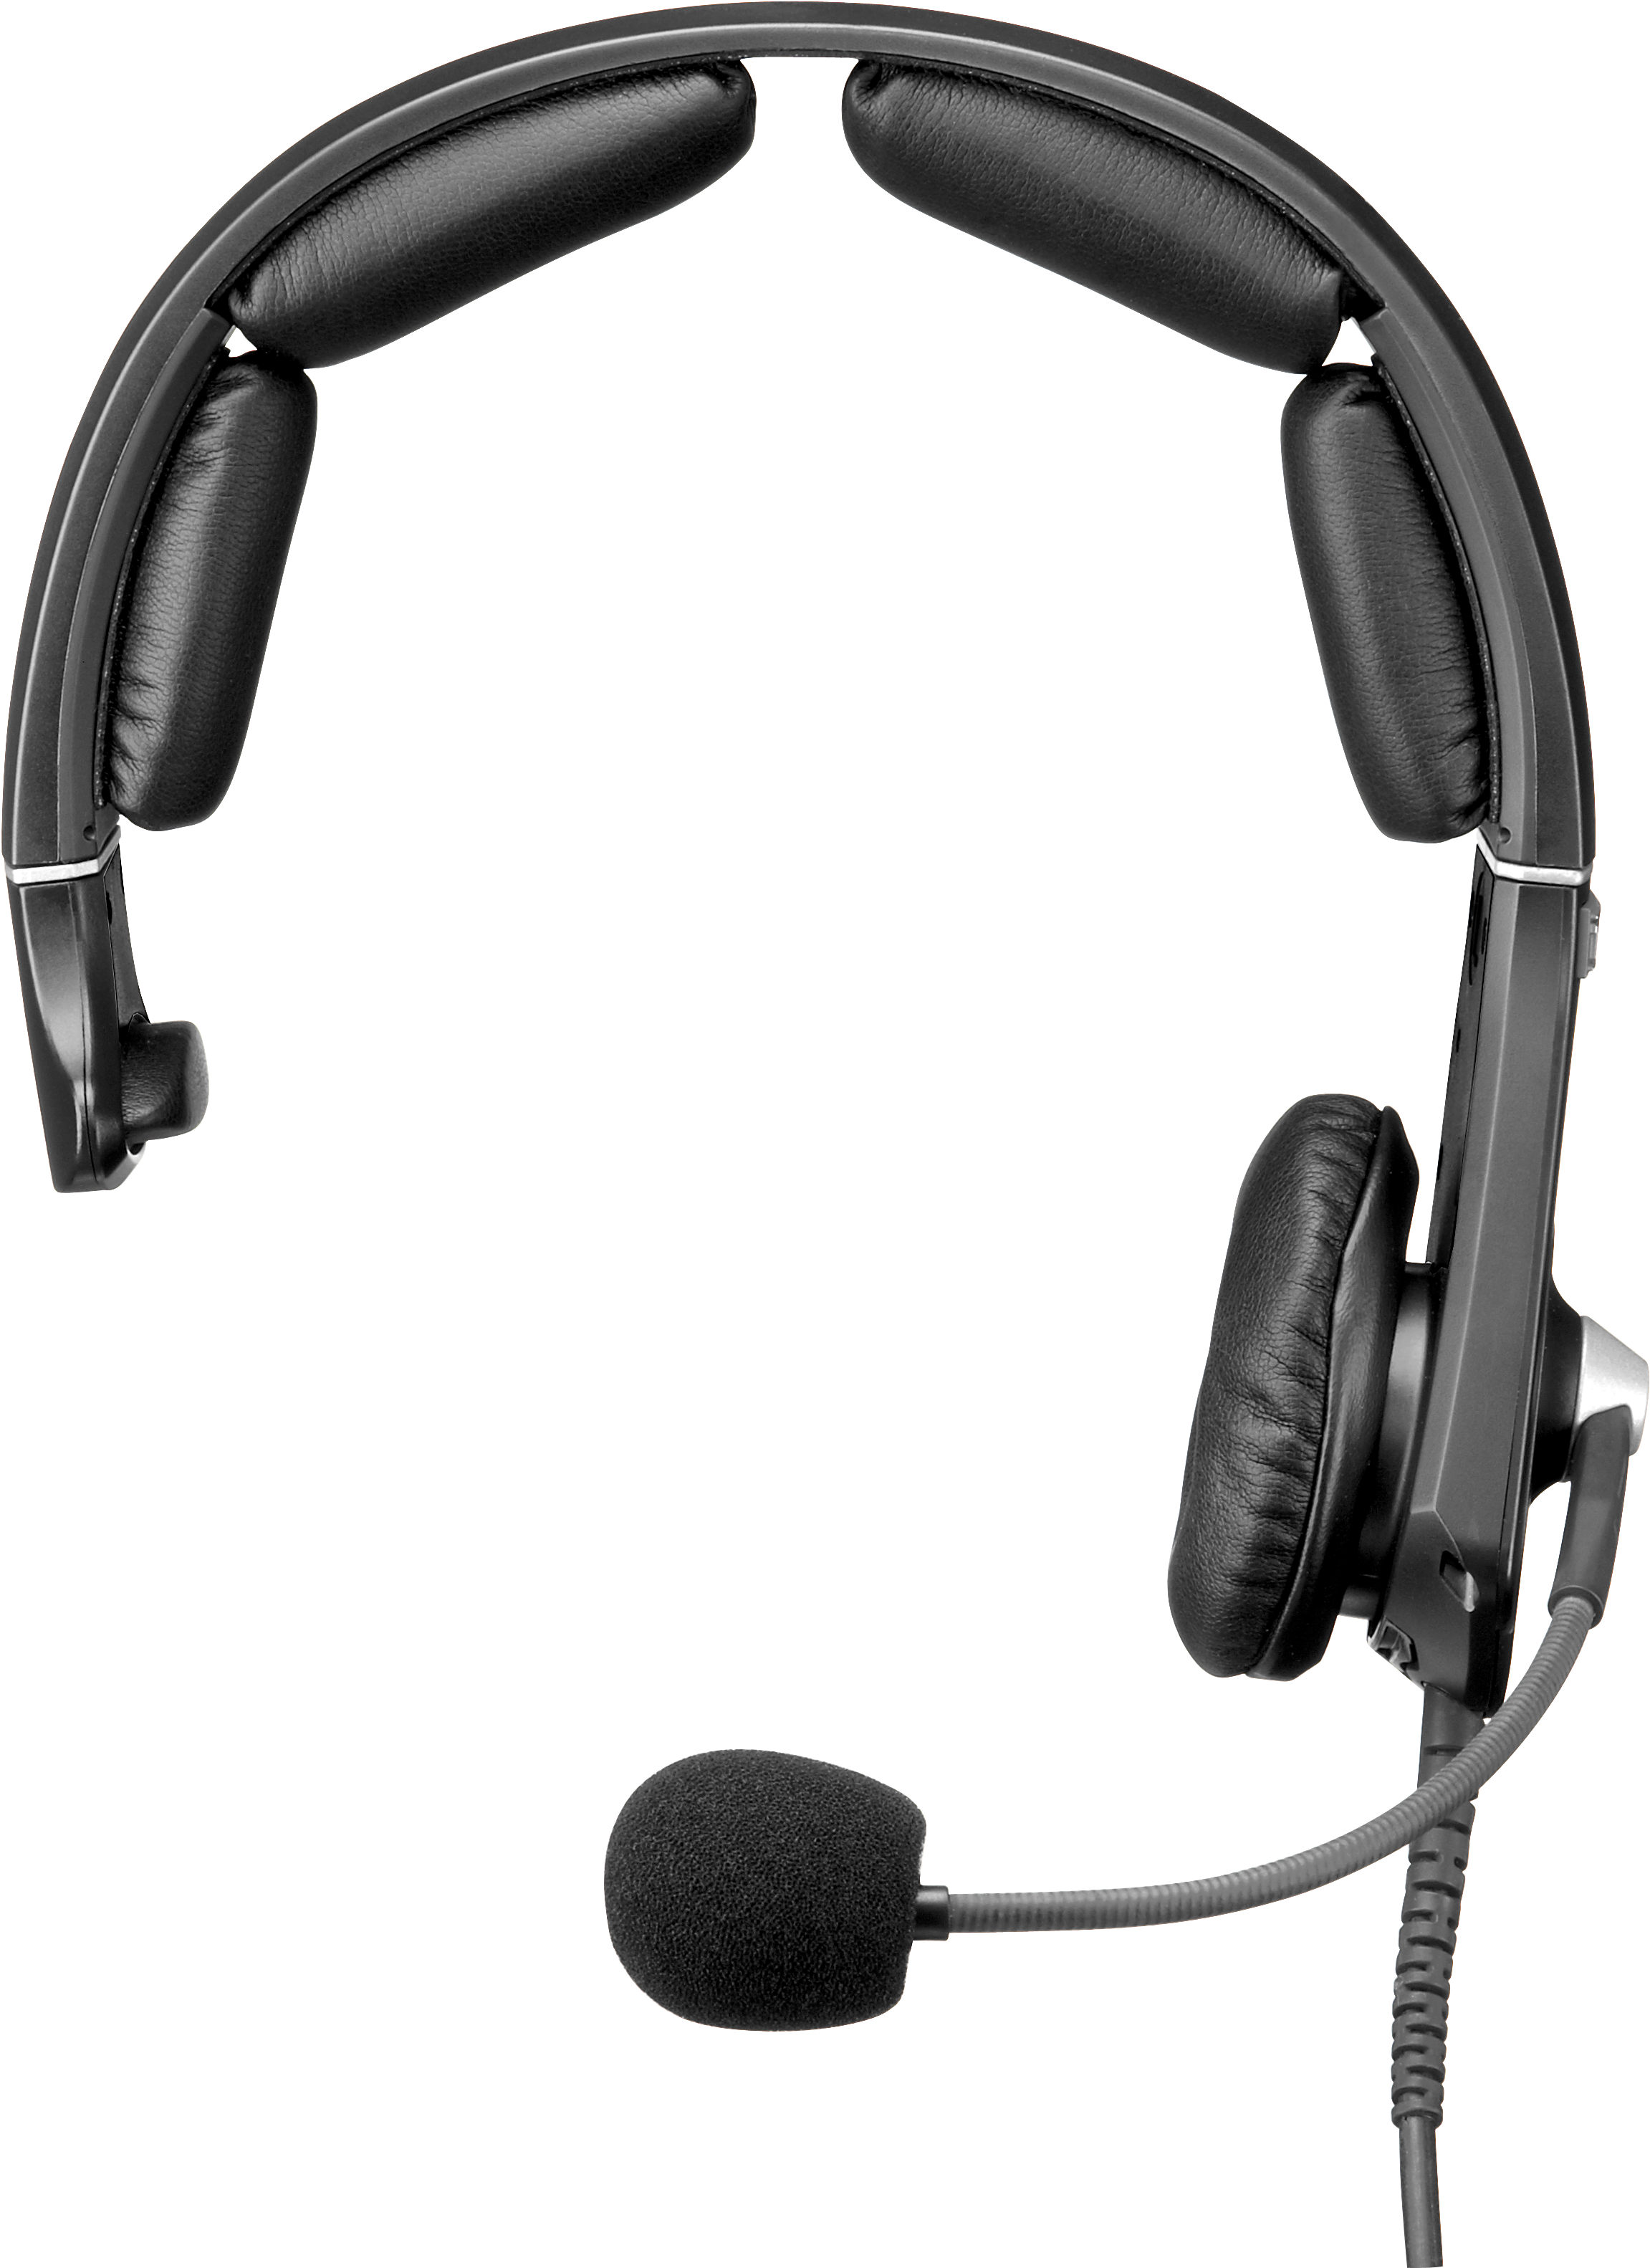 A Black Headphones With A Microphone